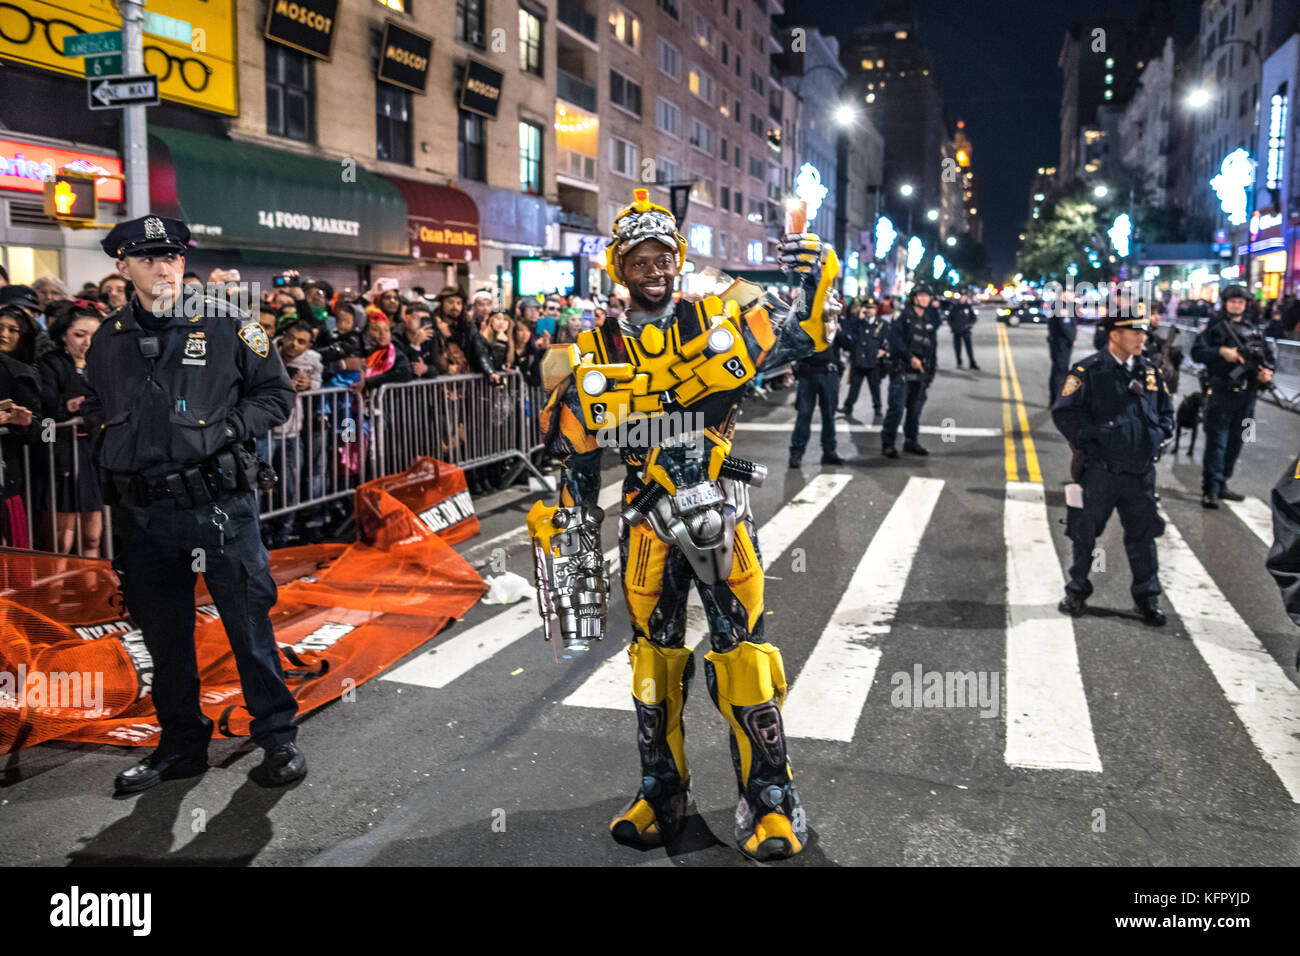 New York, USA. 31st Oct, 2017. A reveler wears costume as he takes a photo in front of police during Greenwich Village Halloween Parade. Security was reinforced earlier today after a terrorist attack in downtown New York. Credit: Enrique Shore/Alamy Live News Stock Photo